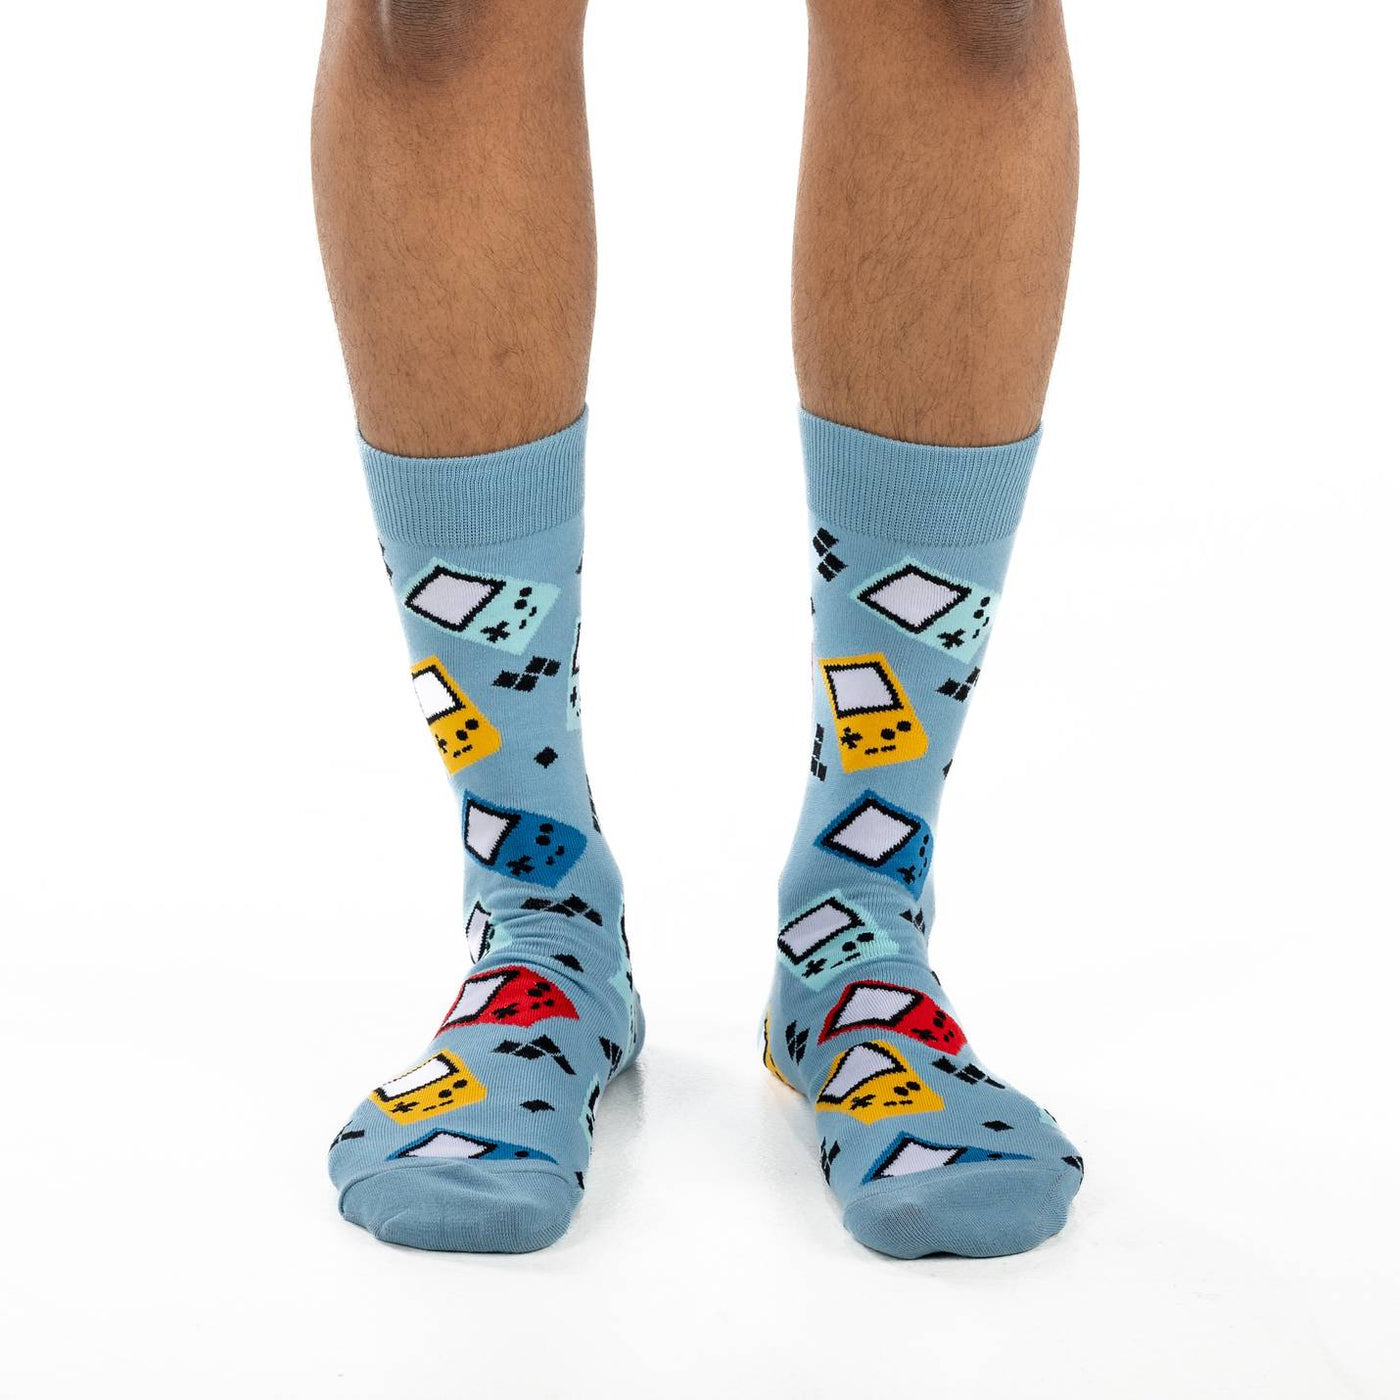 "Handheld Game Console" Crew Socks by Good Luck Sock